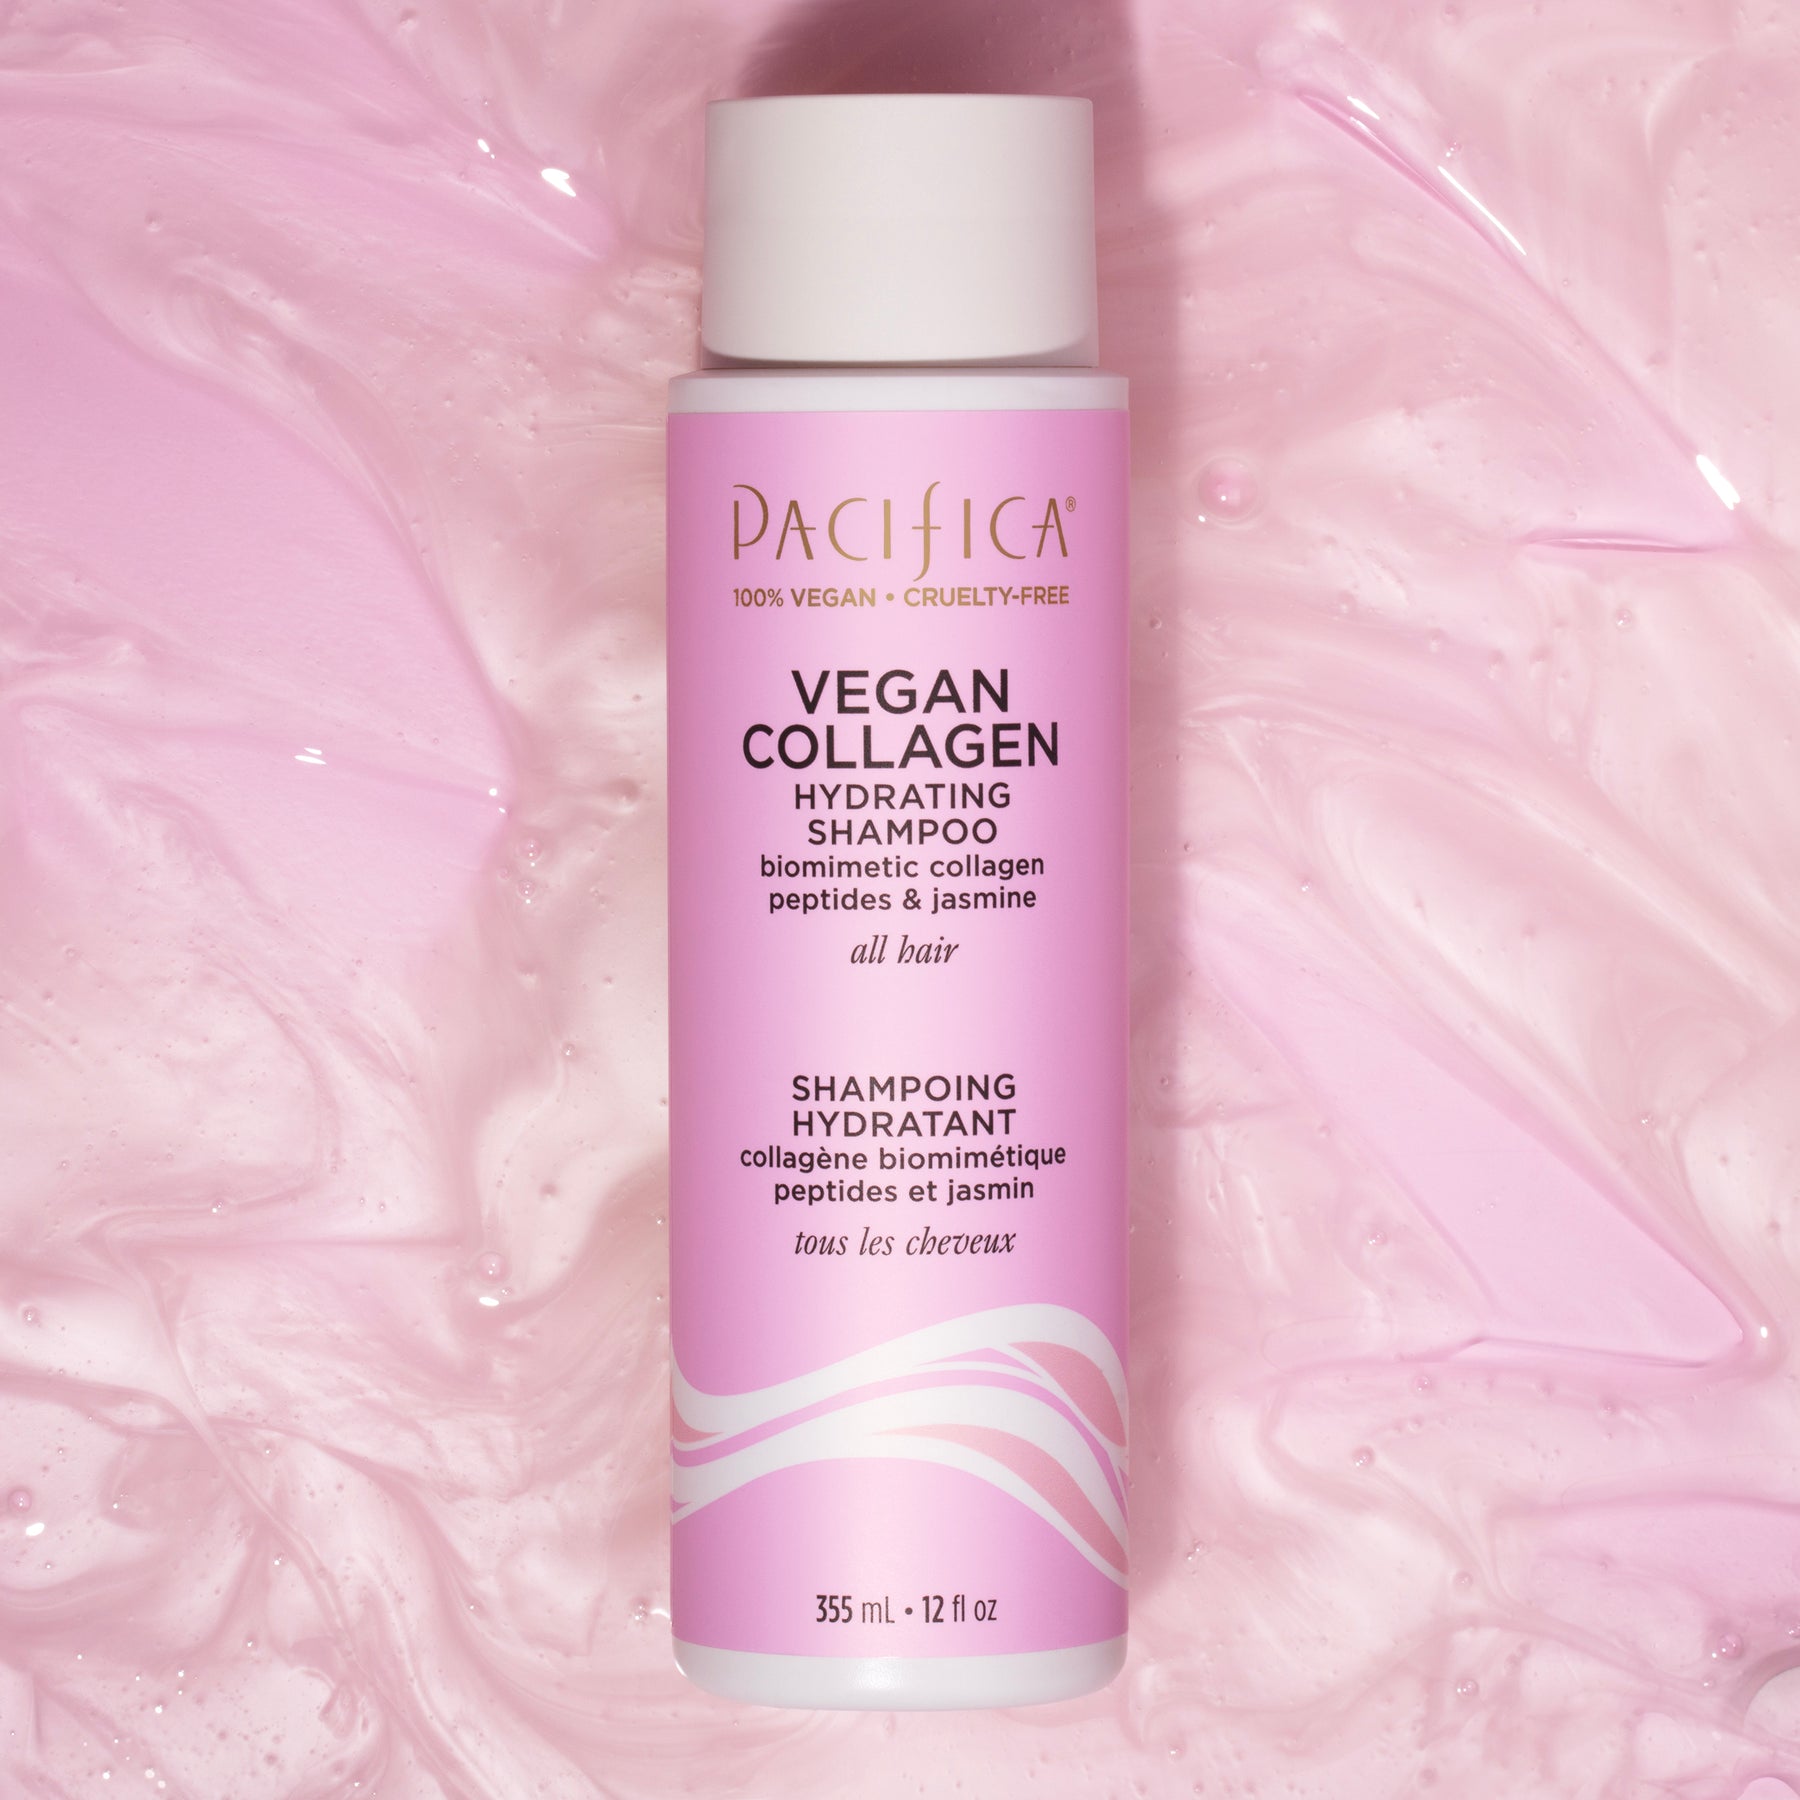 Vegan Collagen Hydrating Shampoo - Haircare - Pacifica Beauty